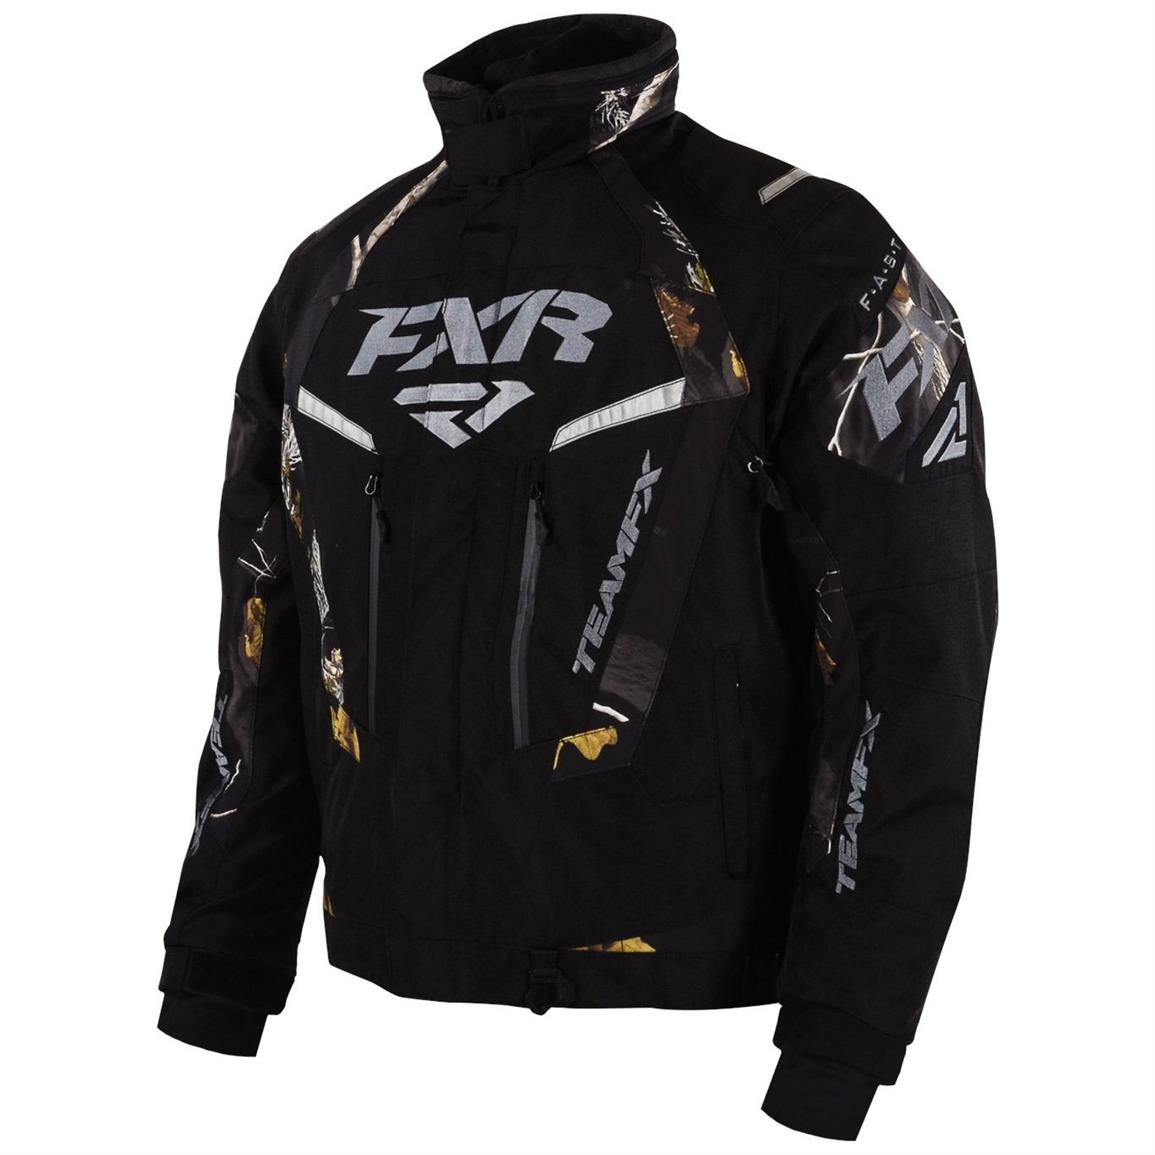 FXR Team FX Jacket - 627783, Snowmobile Clothing at Sportsman's Guide